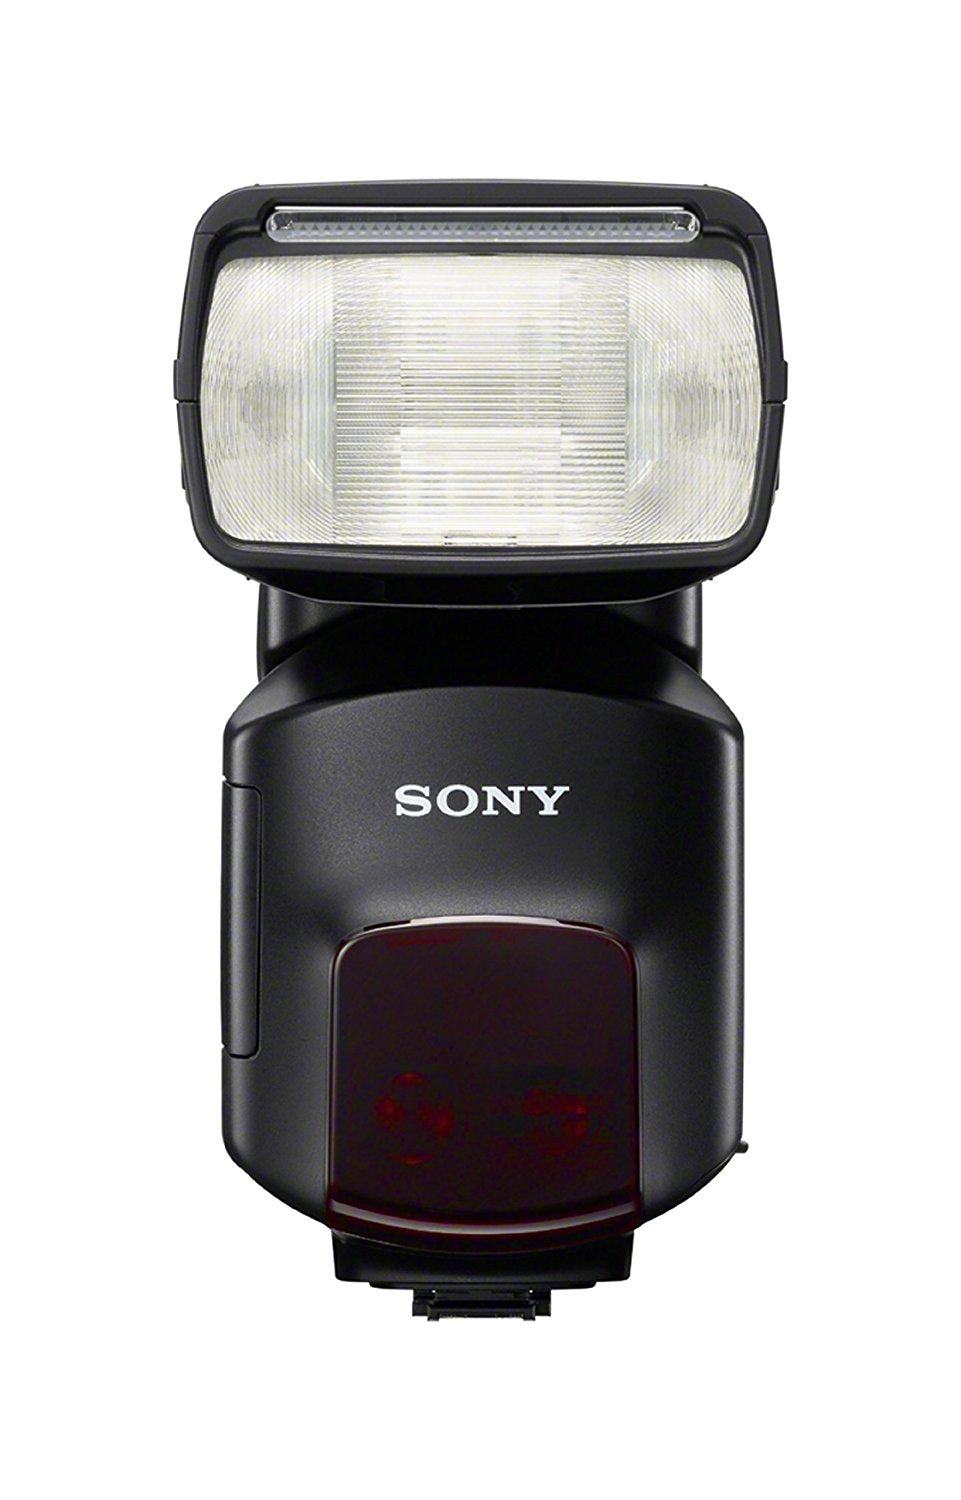 Sony HVL-F60M - Hot-shoe clip-on flash